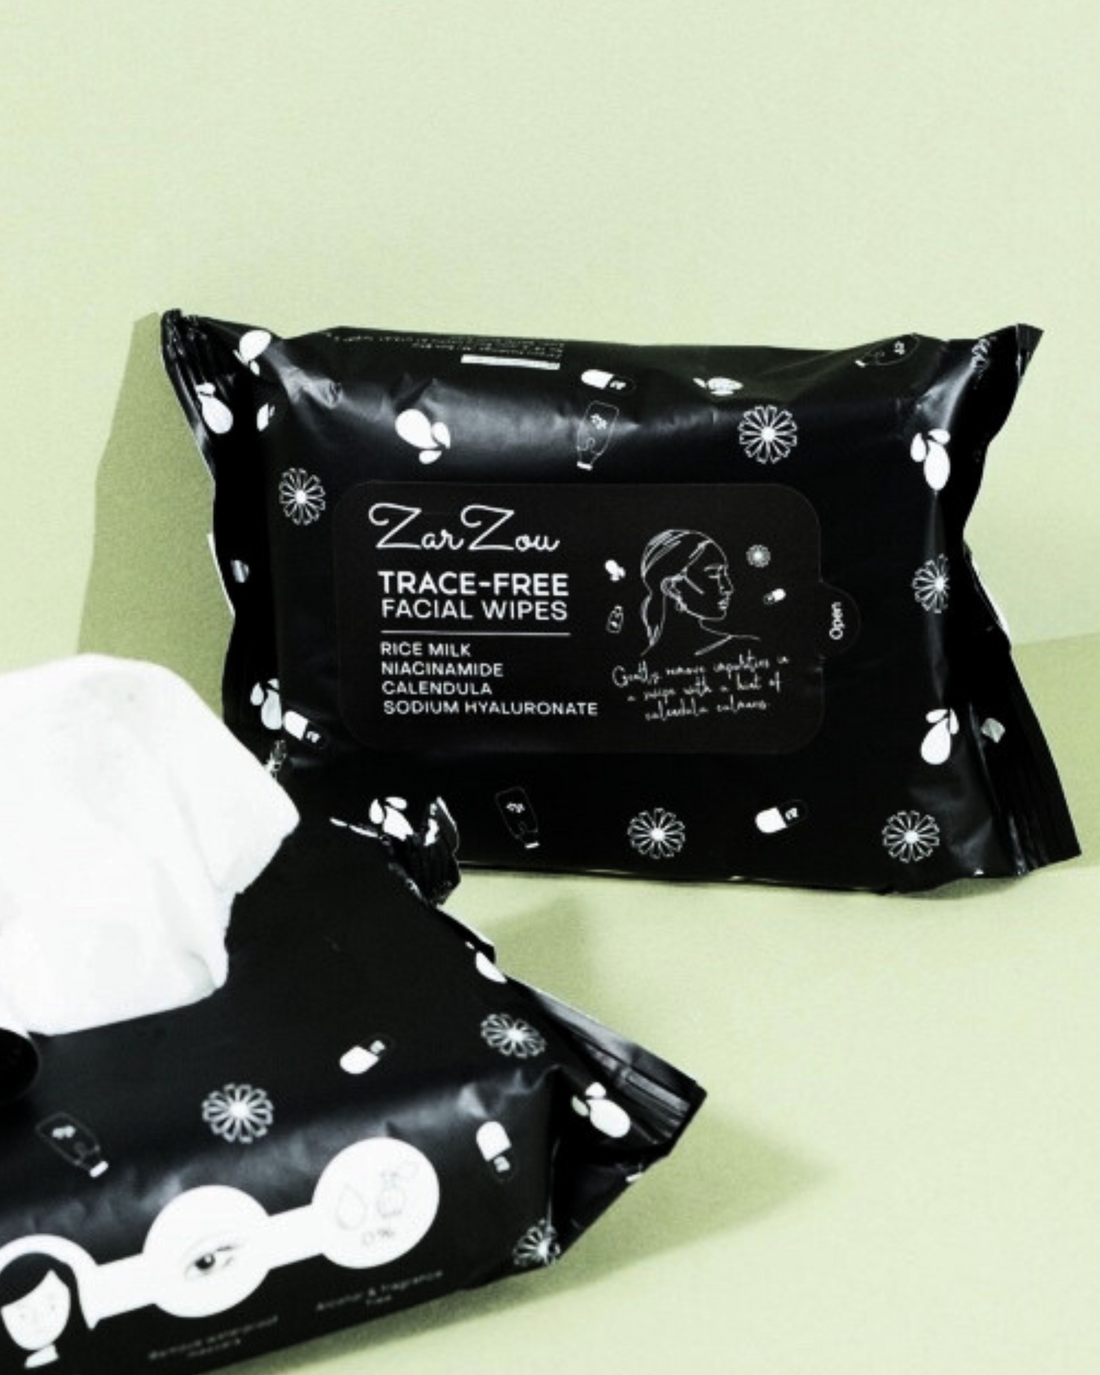 Zarzou Trace-Free Facial Wipes (25sheets/ pack)